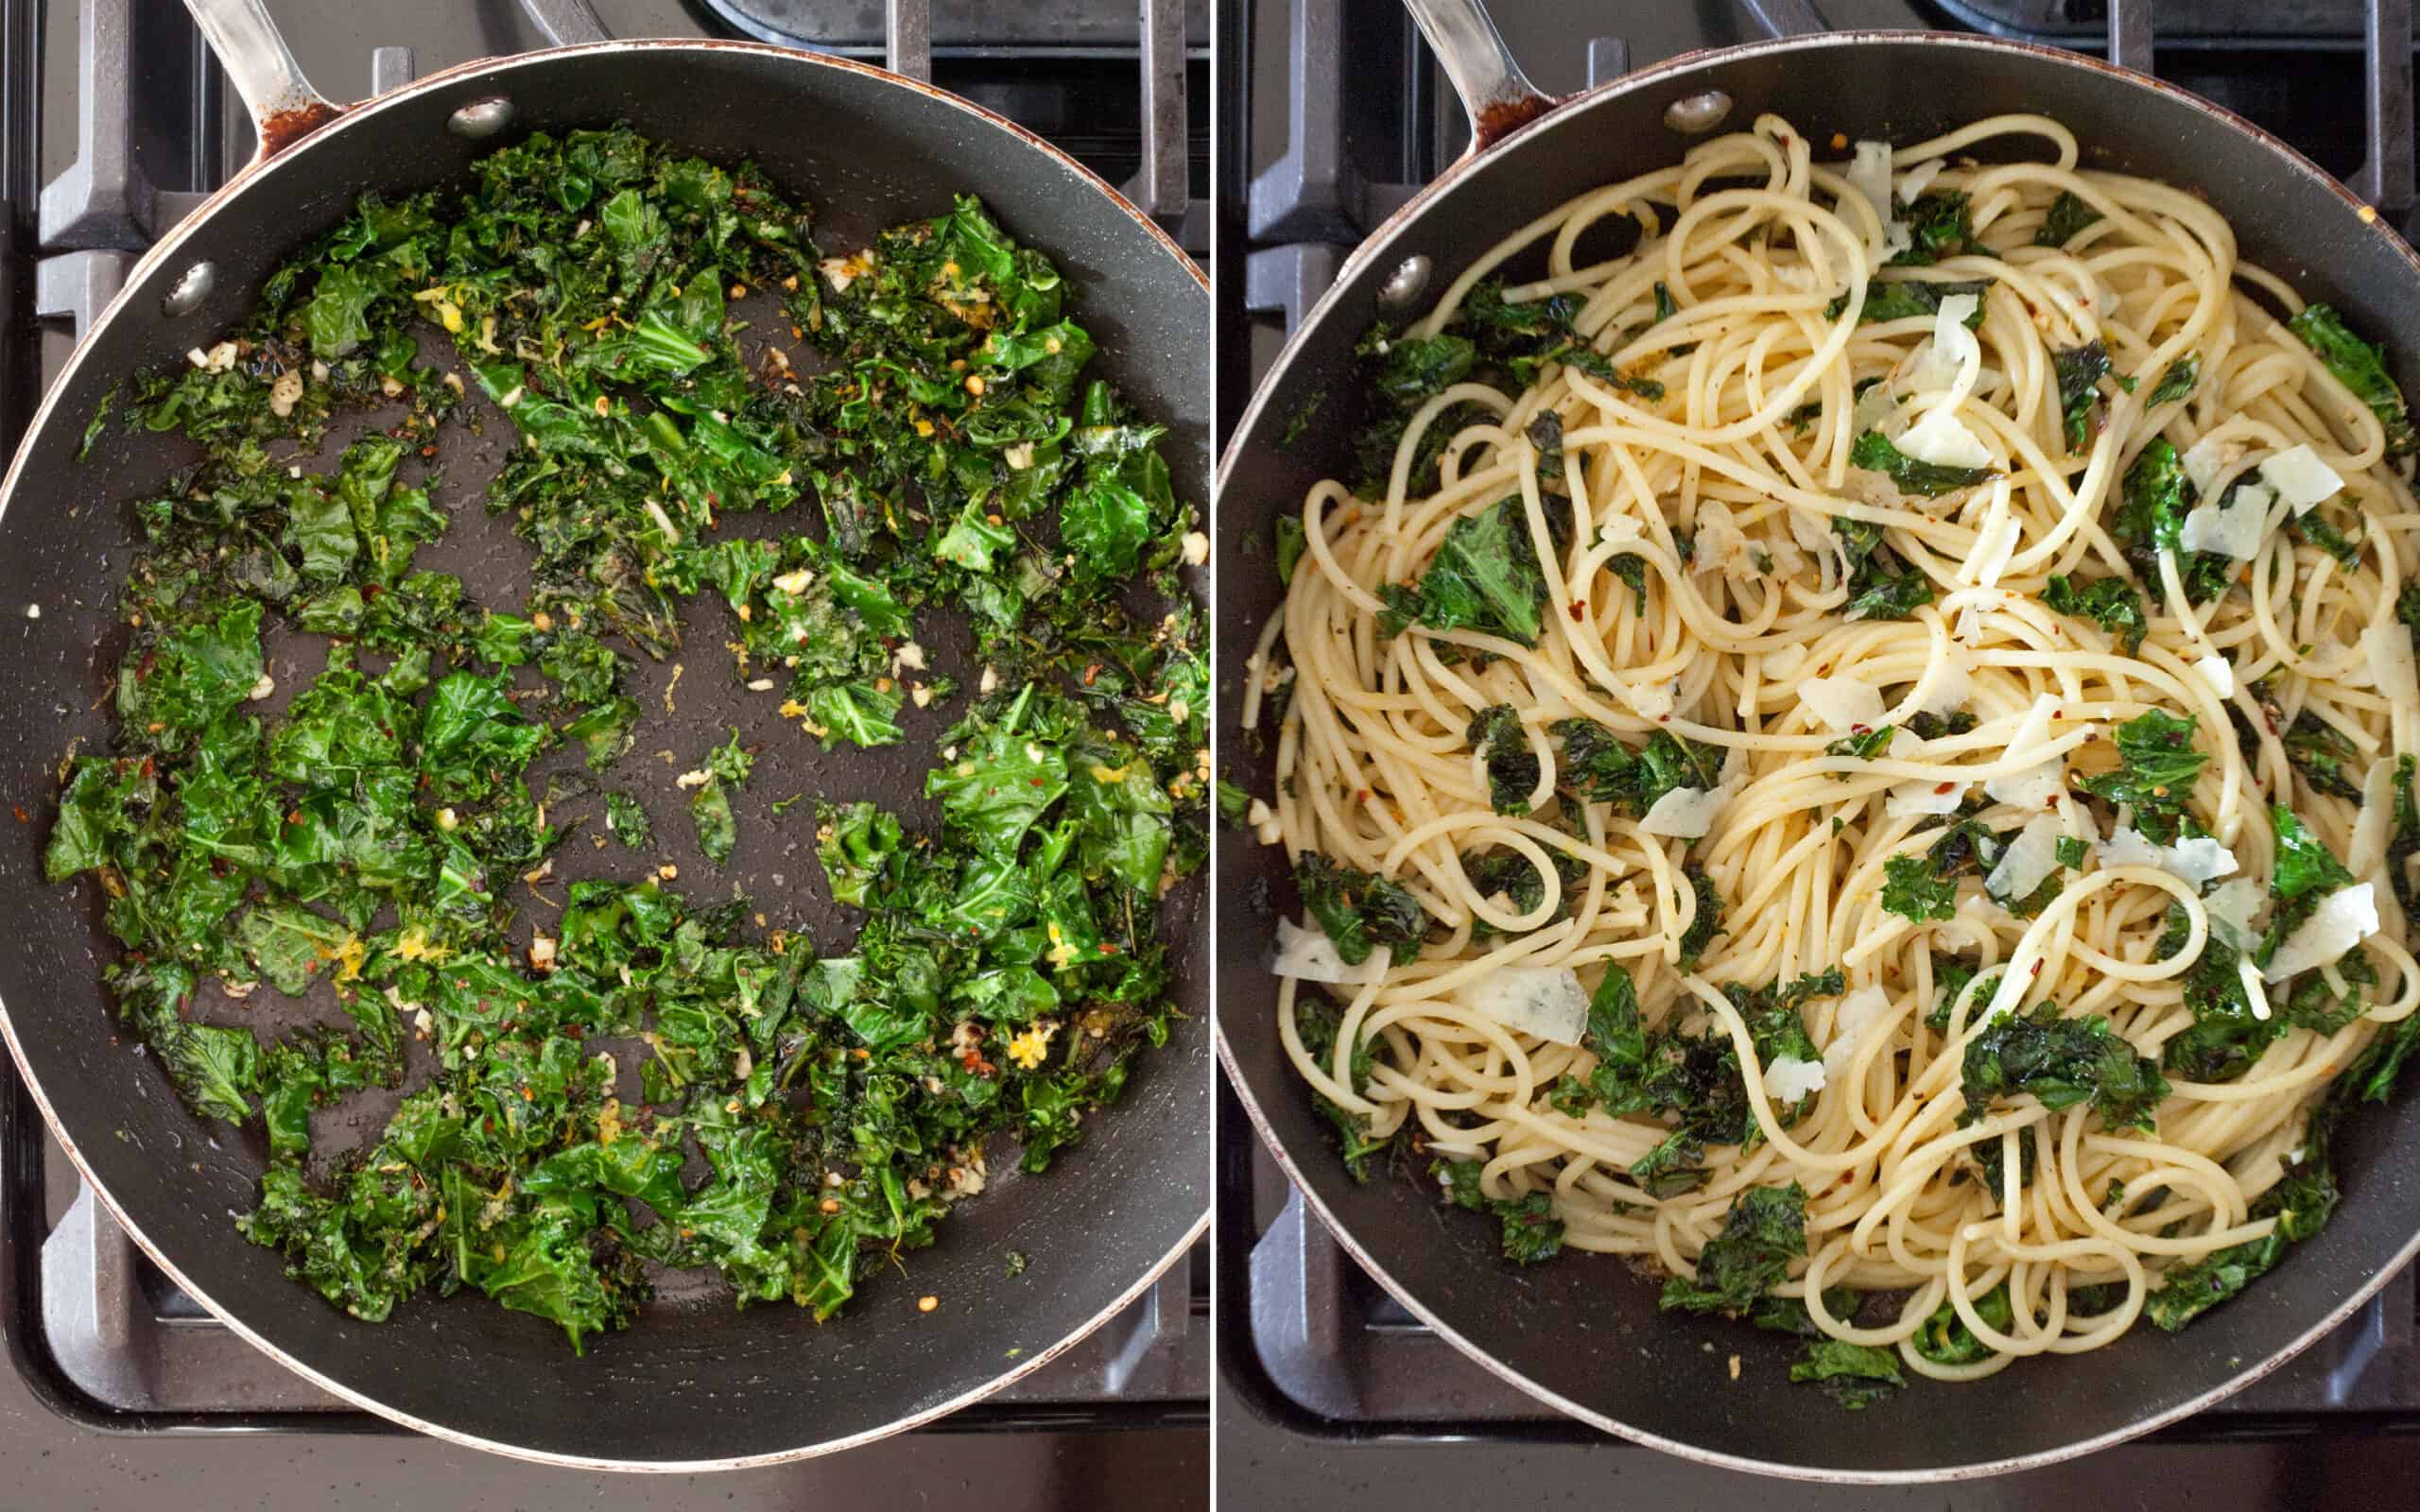 Saute the kale and then add the spaghetti to the skillet